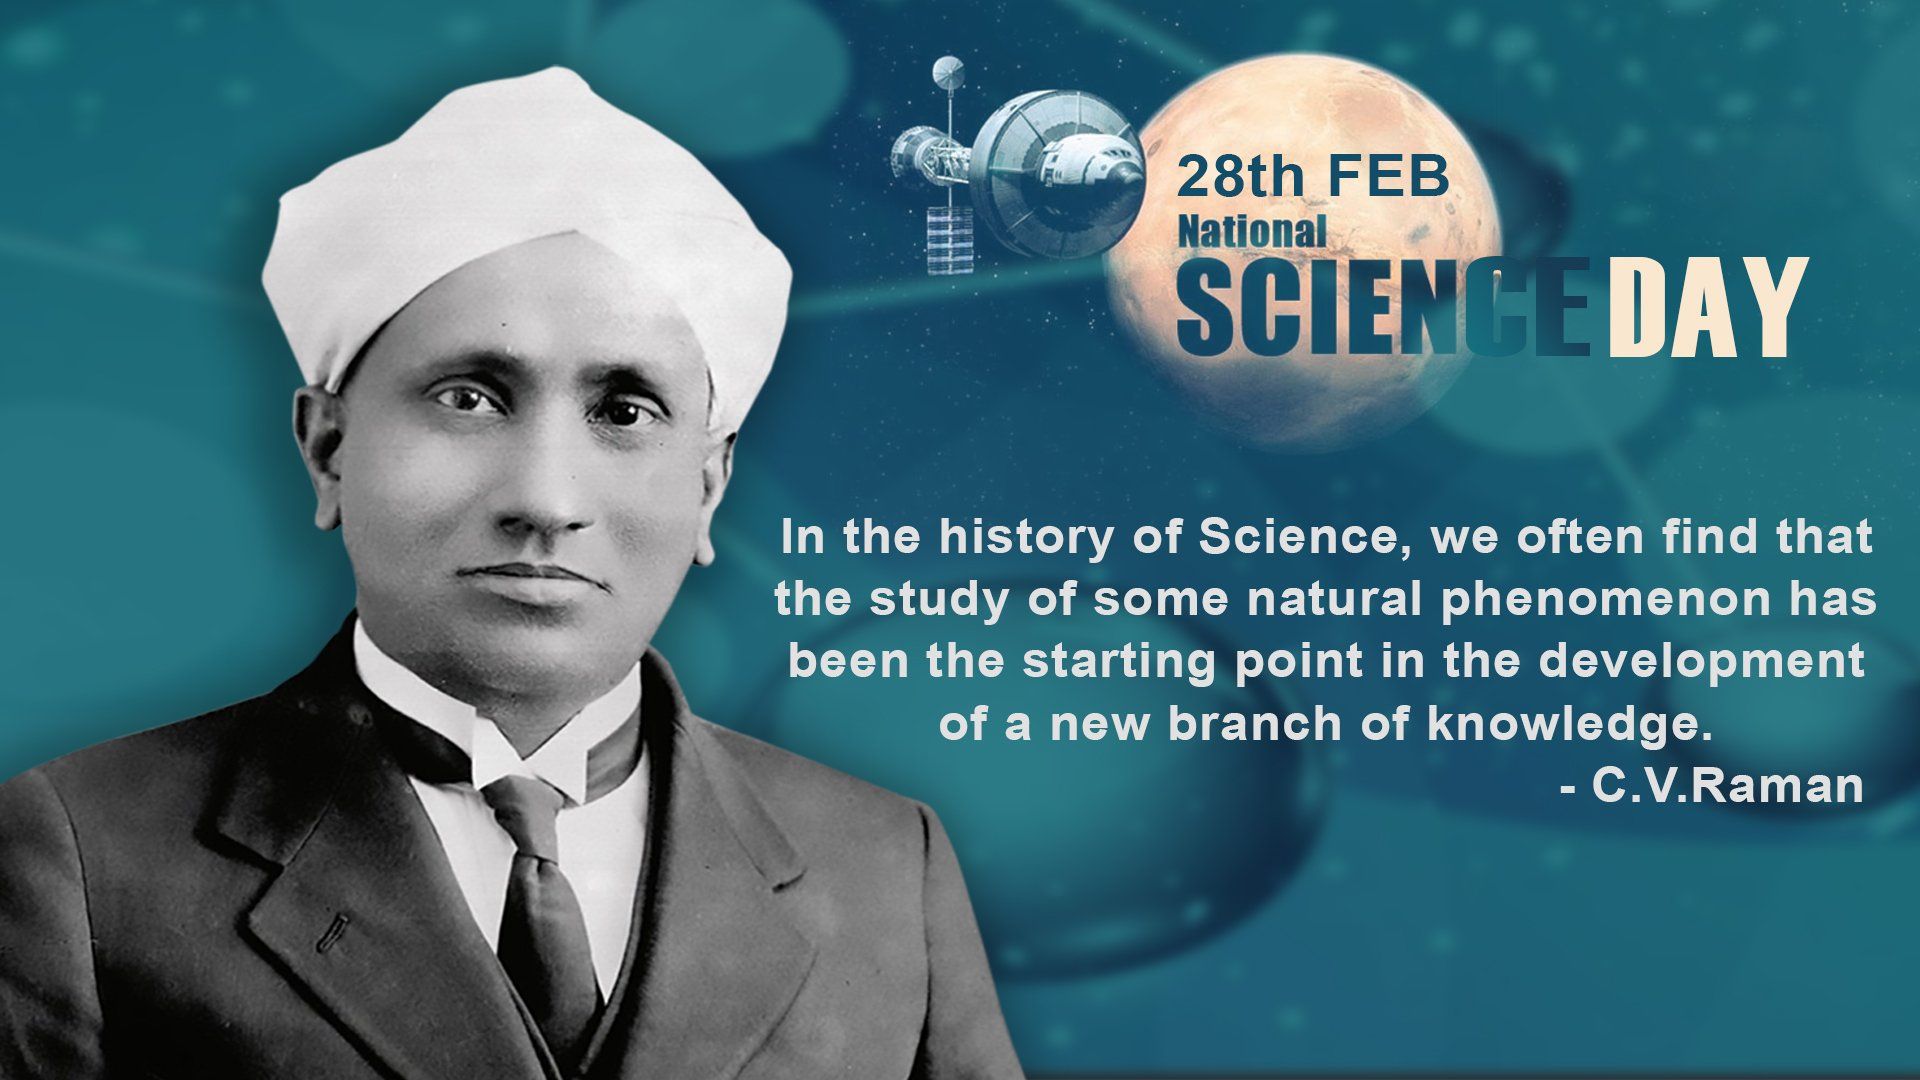 Praful Patel this #NationalScienceDay we must remember the immense contributions made by Sir C.V.Raman in the field of science. We should also celebrate this day to widely spread a